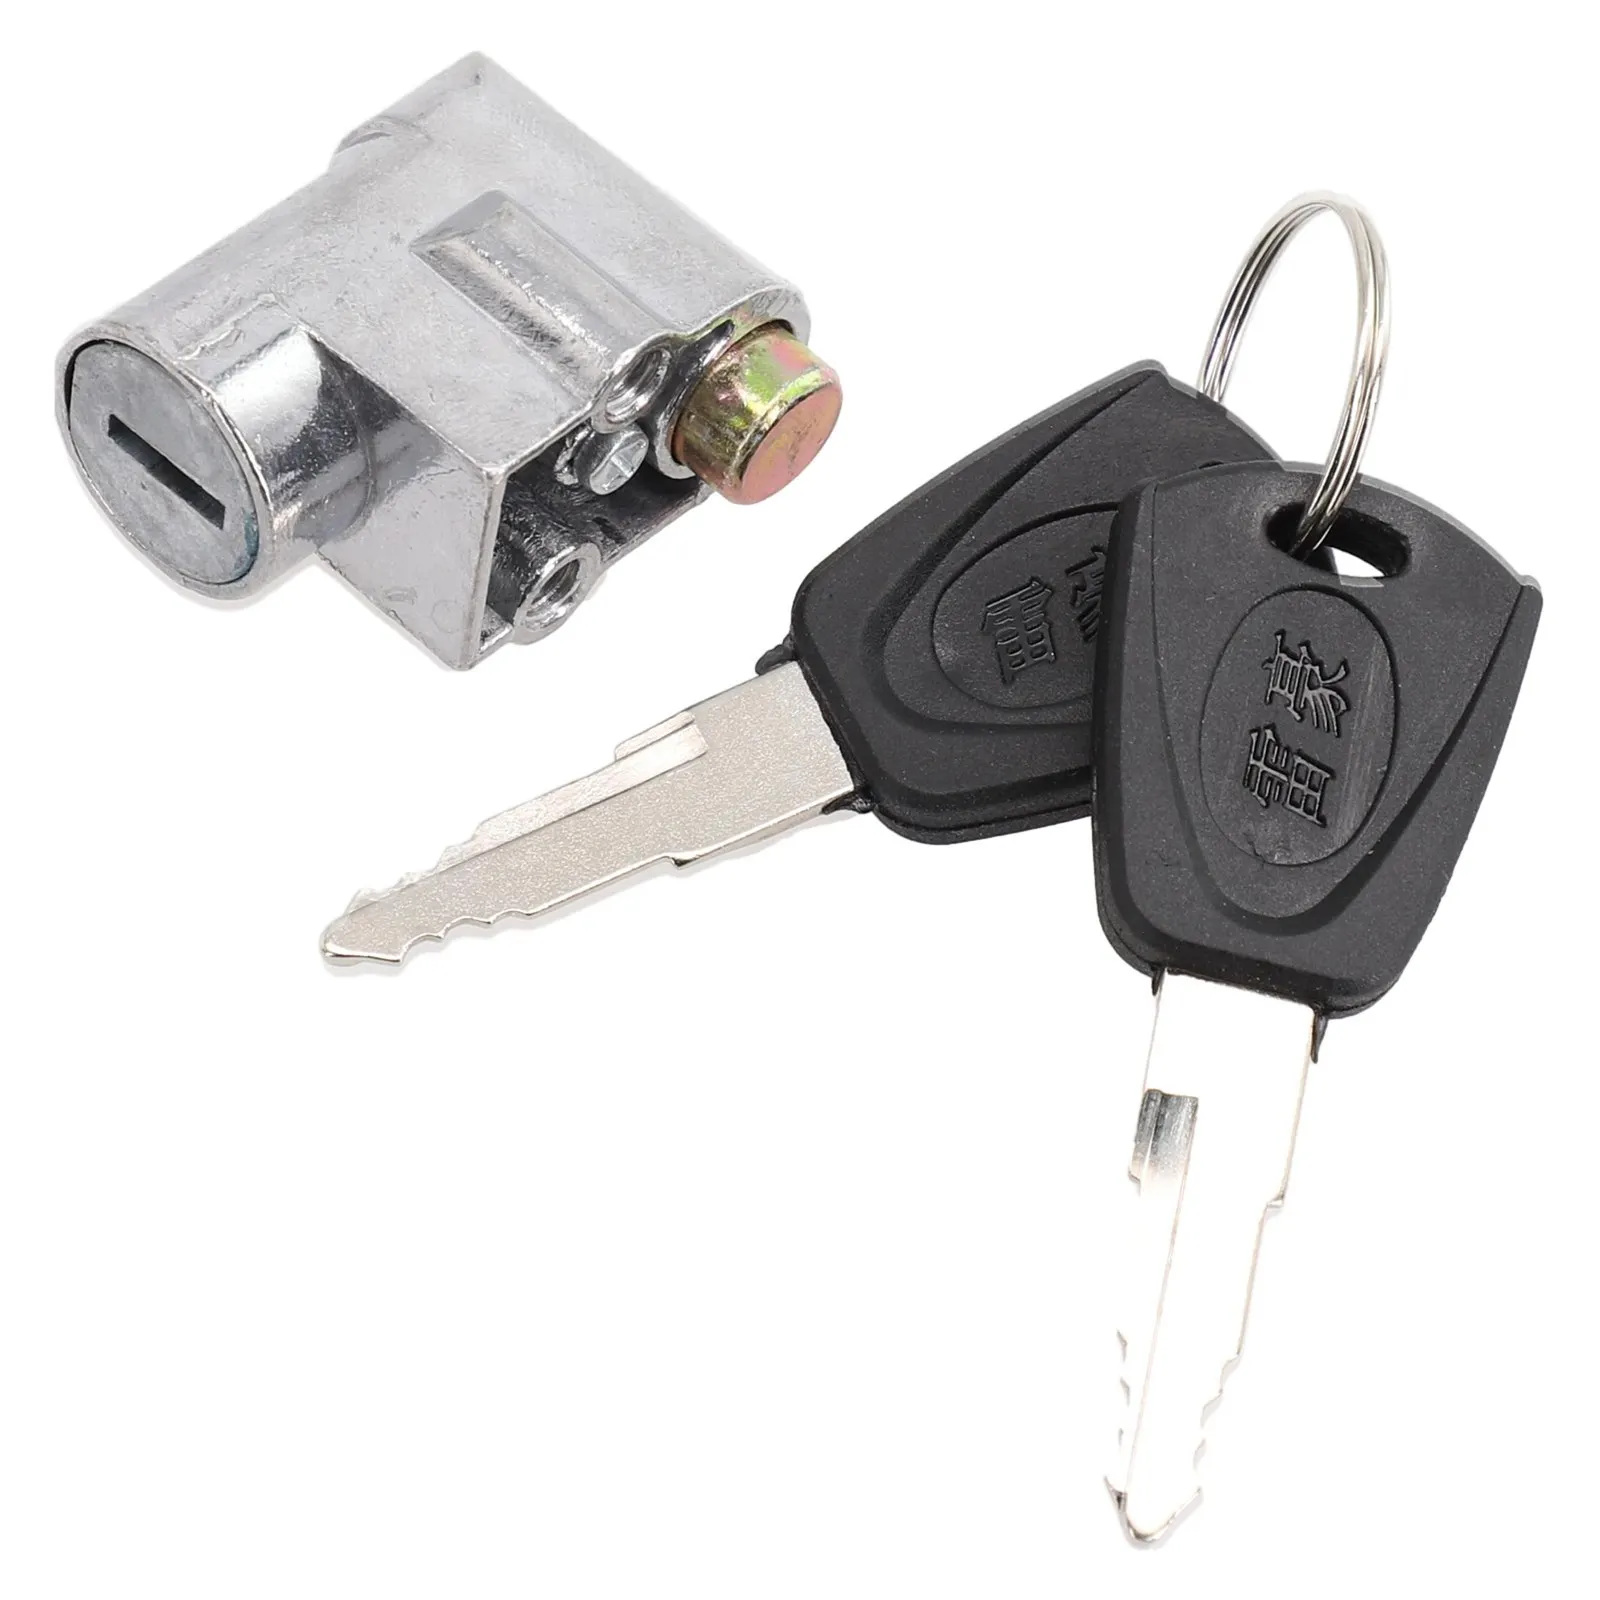 

New Battery Safety Pack Box Lock W/2 Key Ignition Lock Metal For Motorcycle Electric EBike Scooter 70g